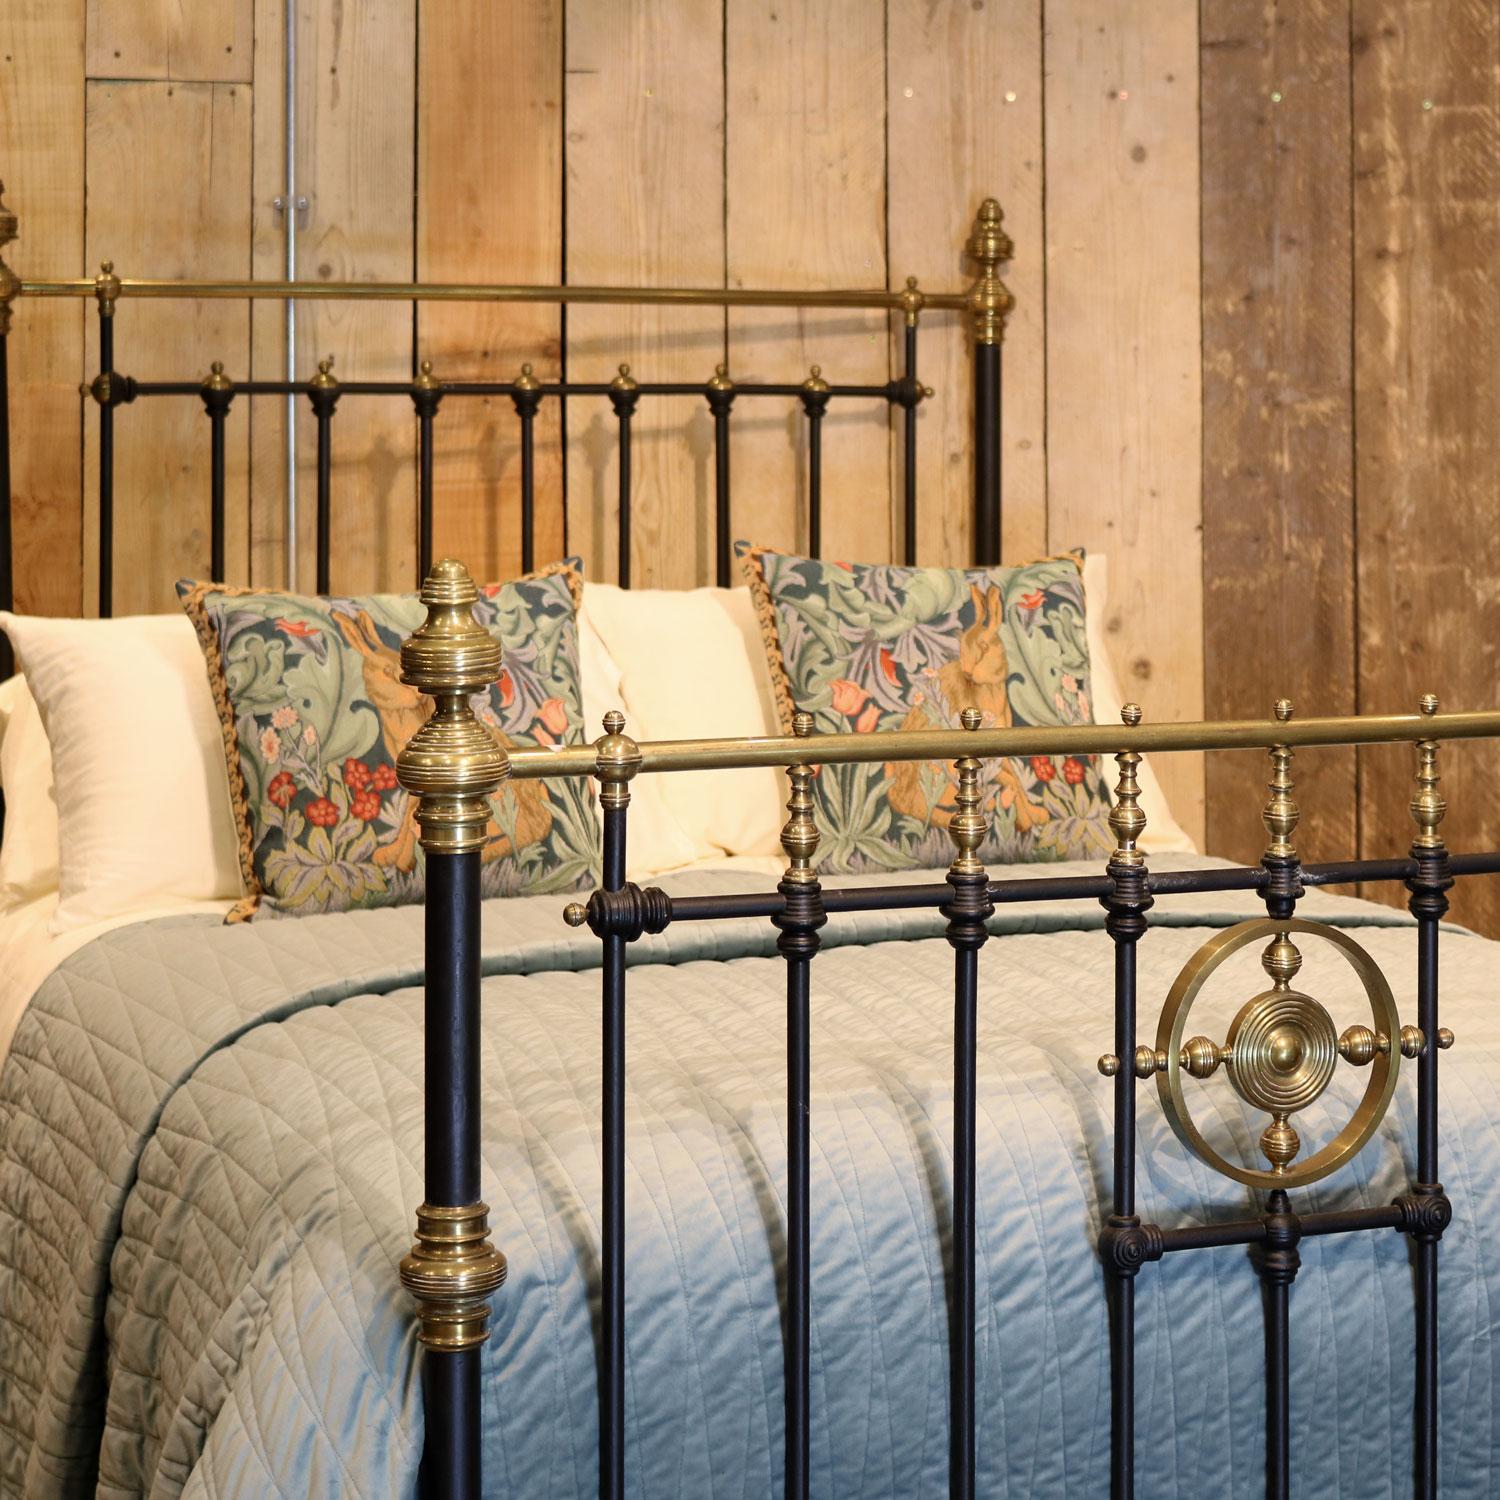 Late Victorian brass and cast iron bedstead, finished in black with straight brass top rail and striking brass centrepiece in the foot board. This bed also has some lovely mouldings with brass detailing throughout. 

This bed accepts a double size